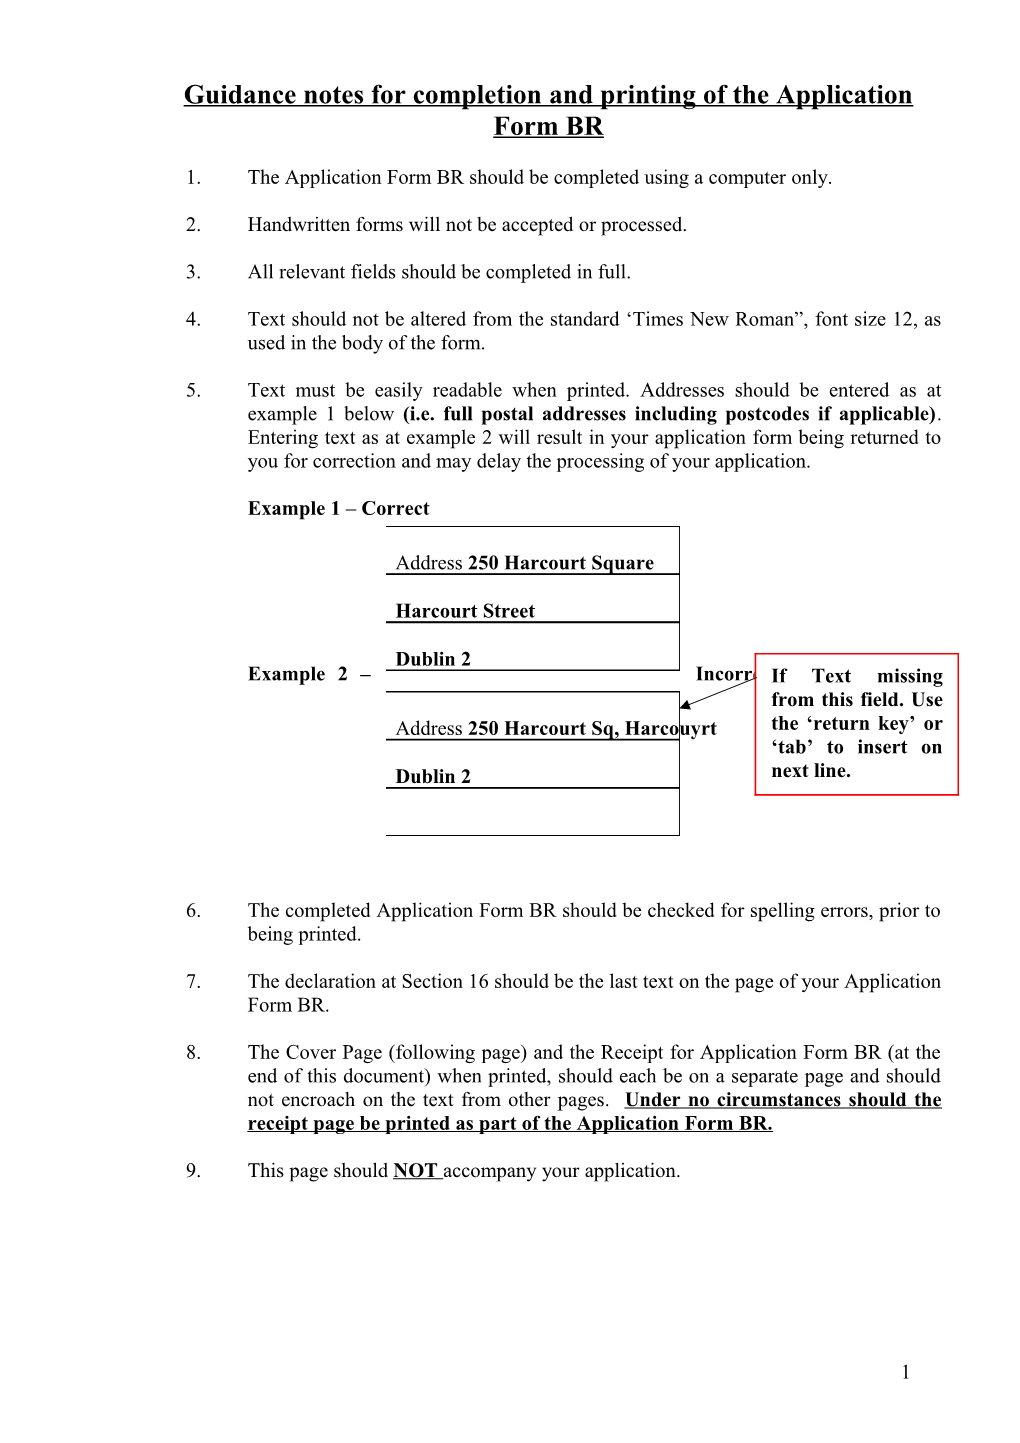 Guidance Notes for Completion and Printing of the Application Form BR